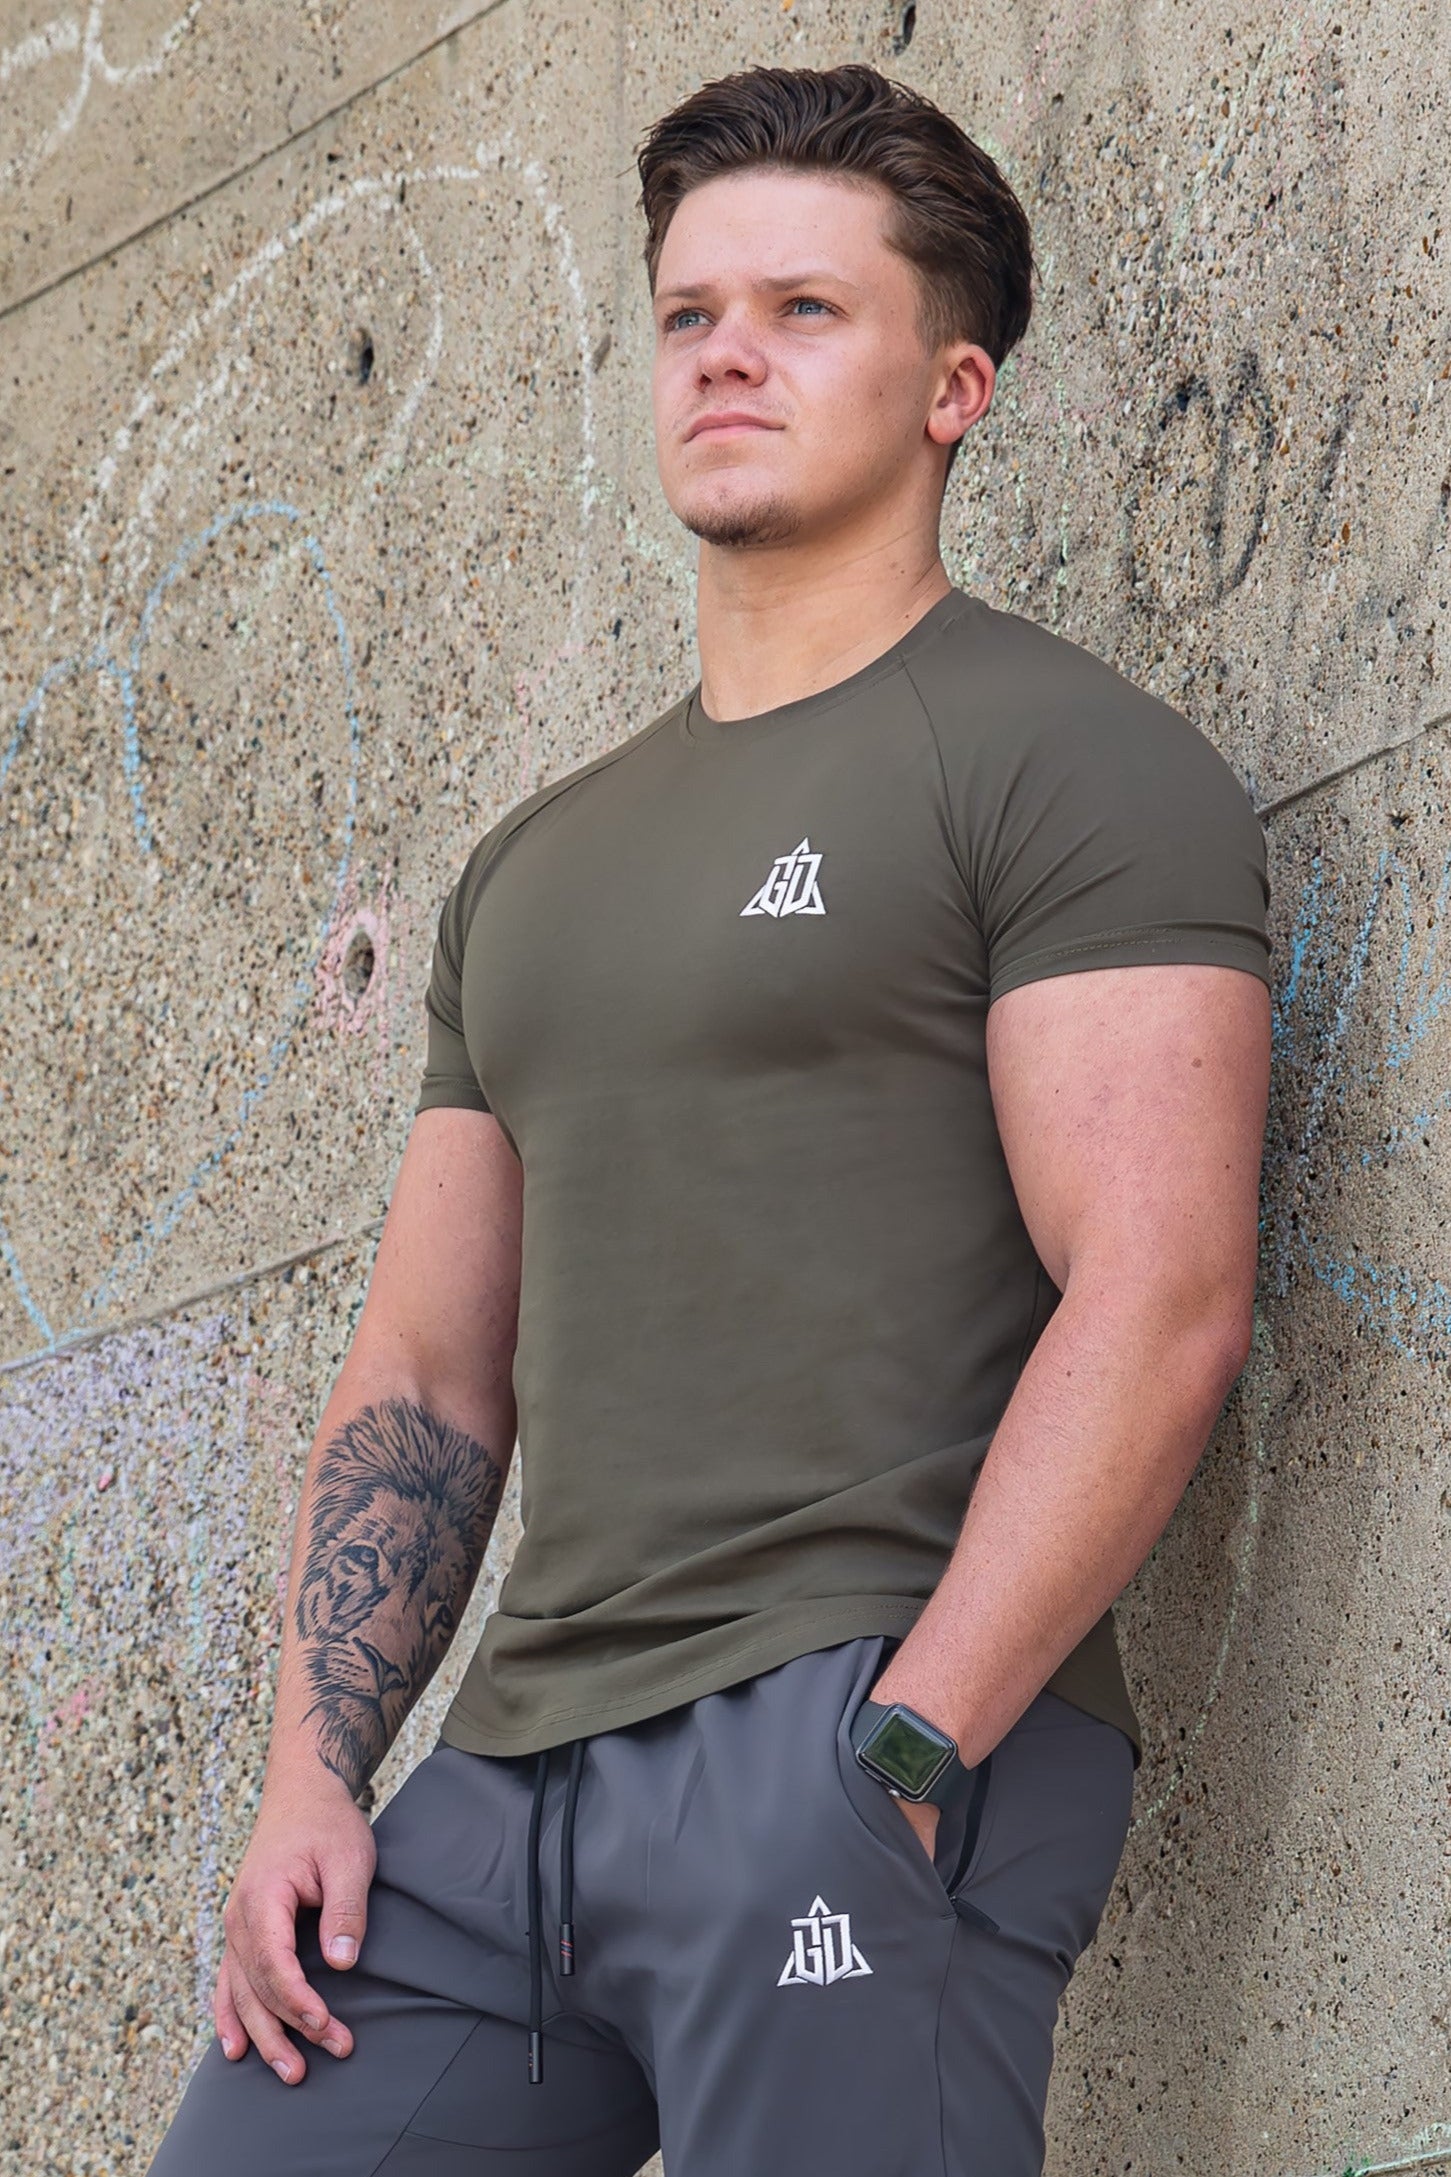 The Signature Curved Slim Green T-shirt